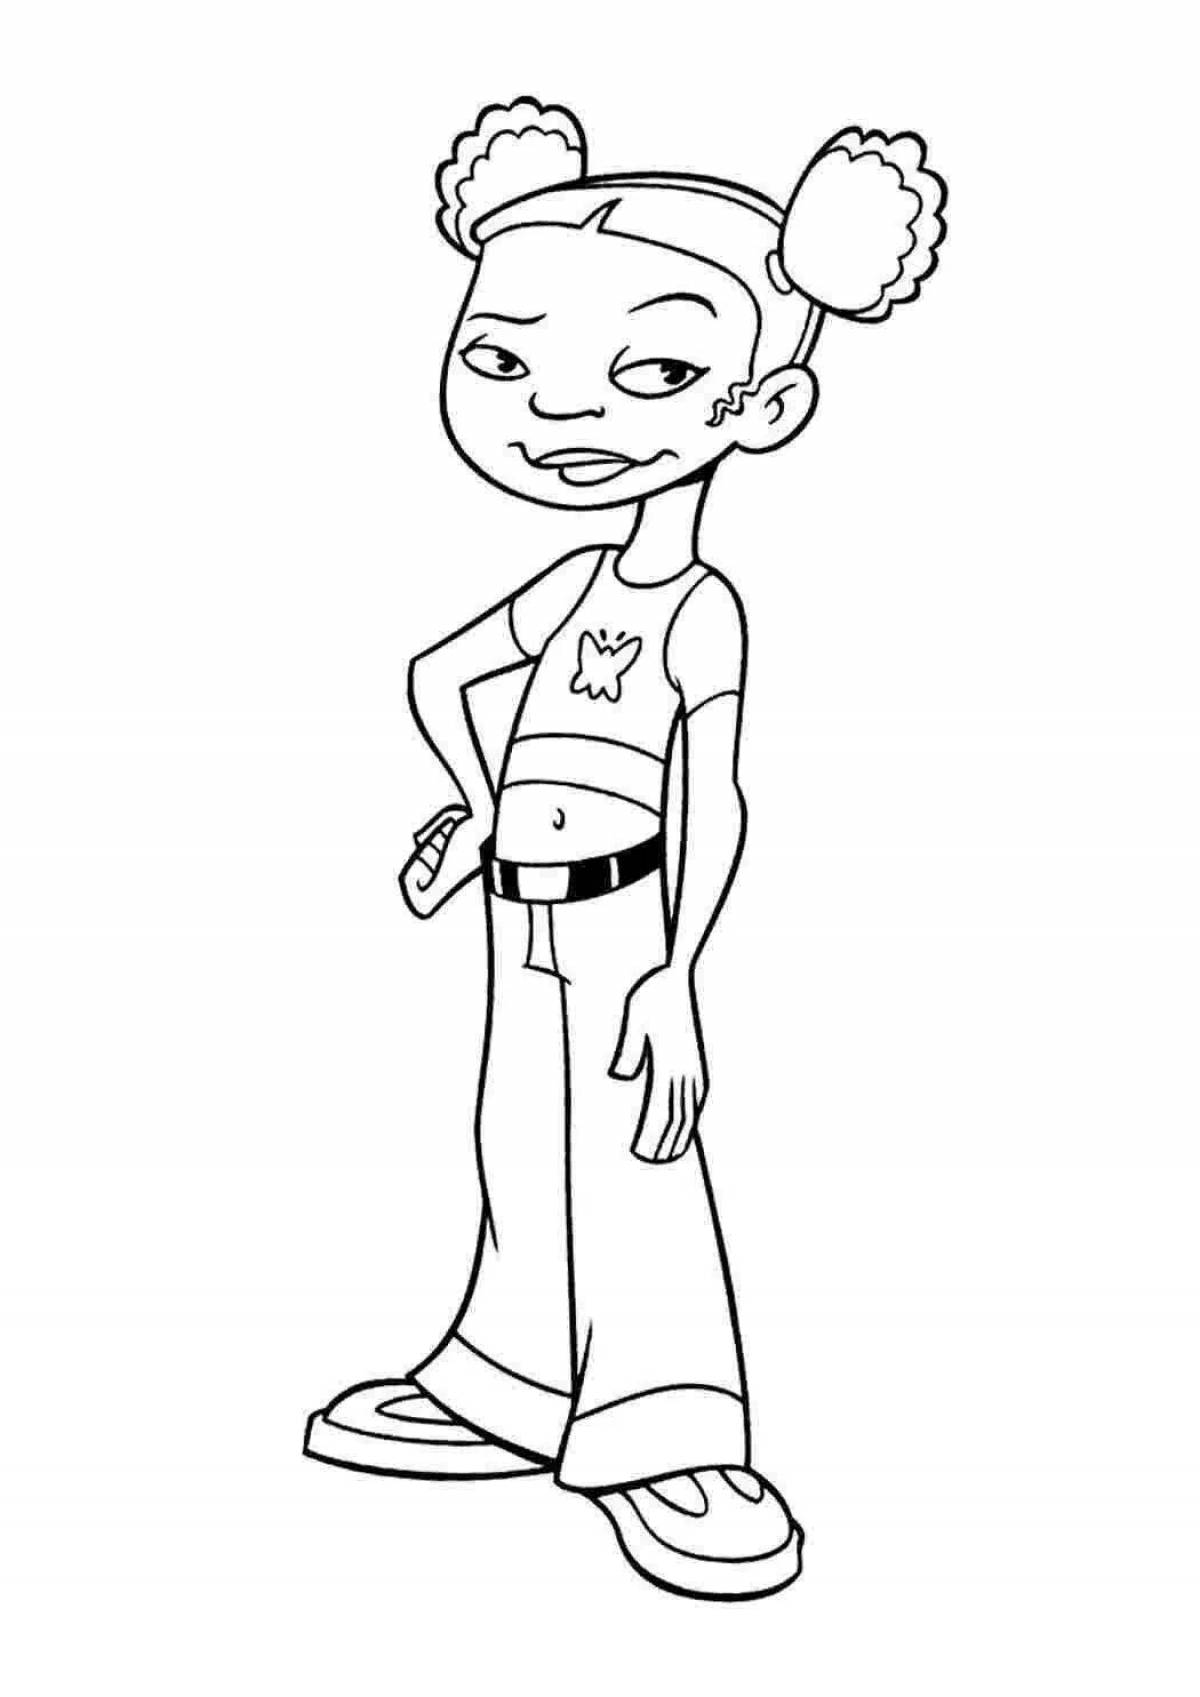 Large american dragon coloring page